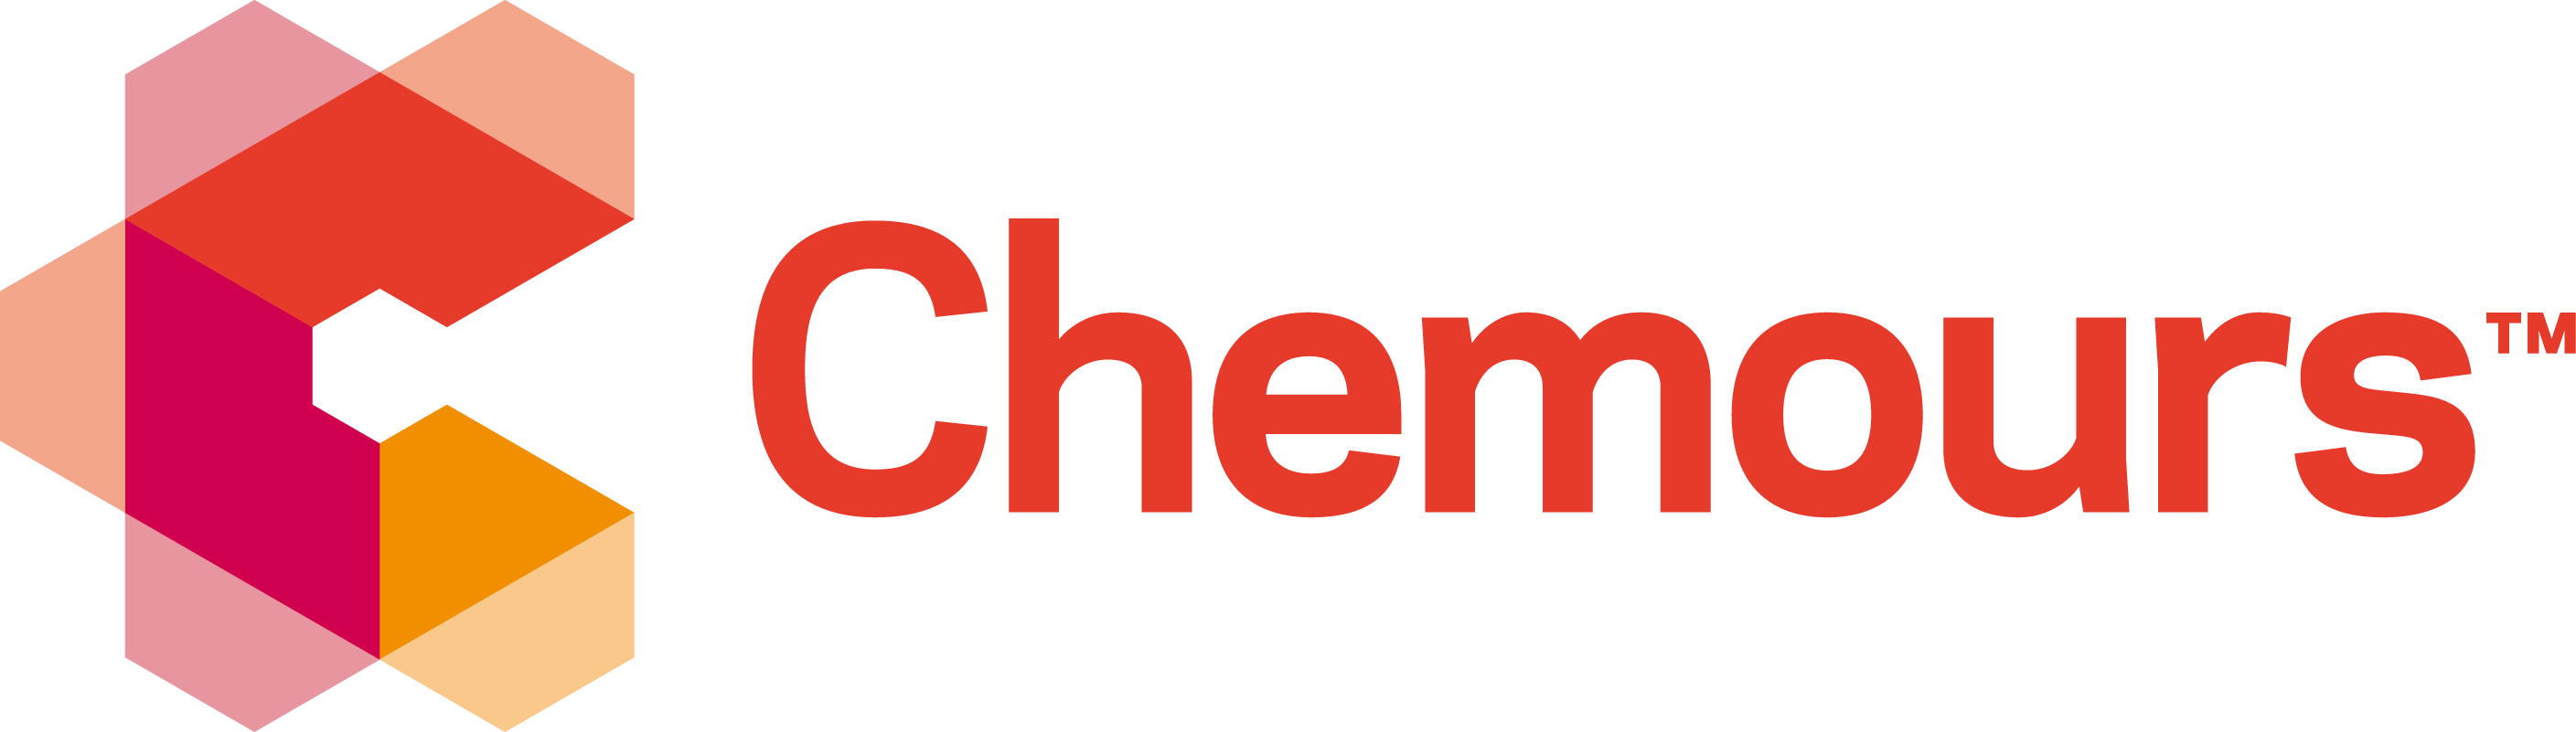 Chemours Logo png